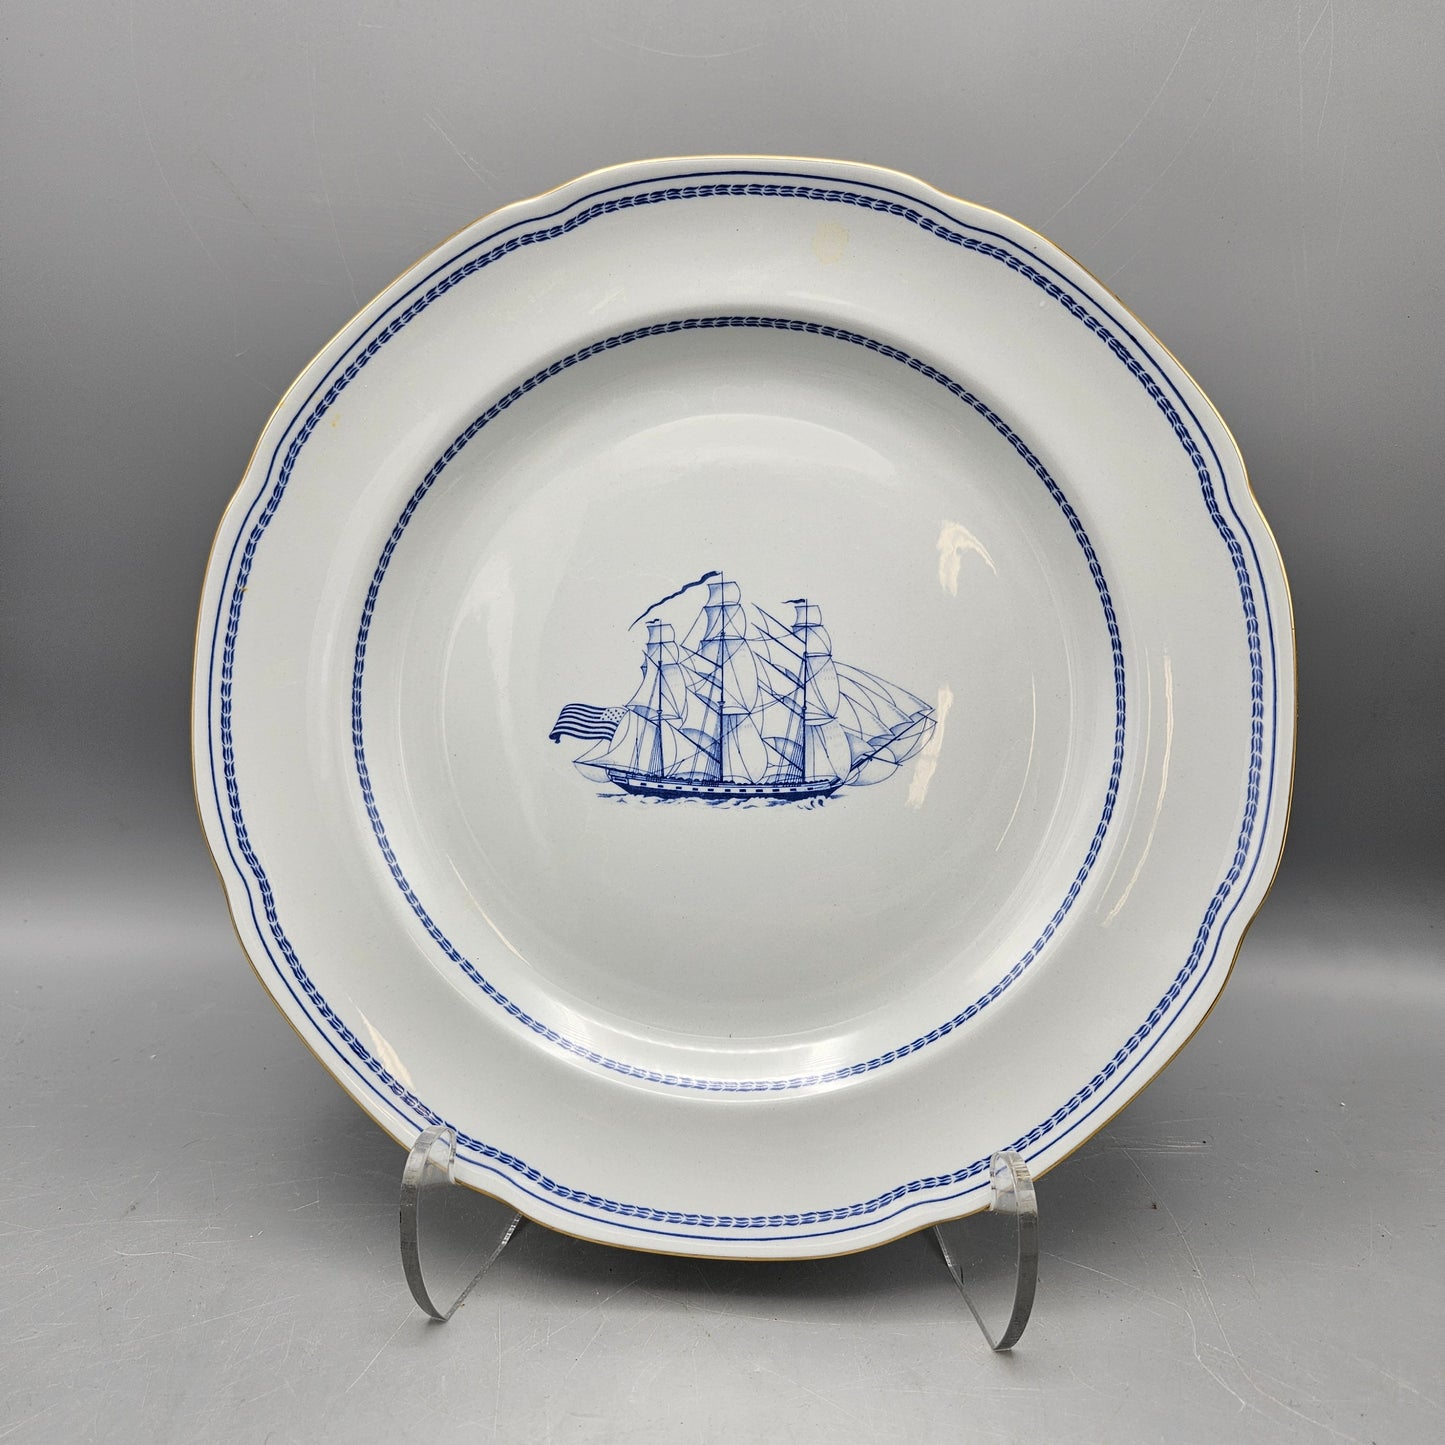 Spode Blue Trade Winds Salad Plates - Eight Available